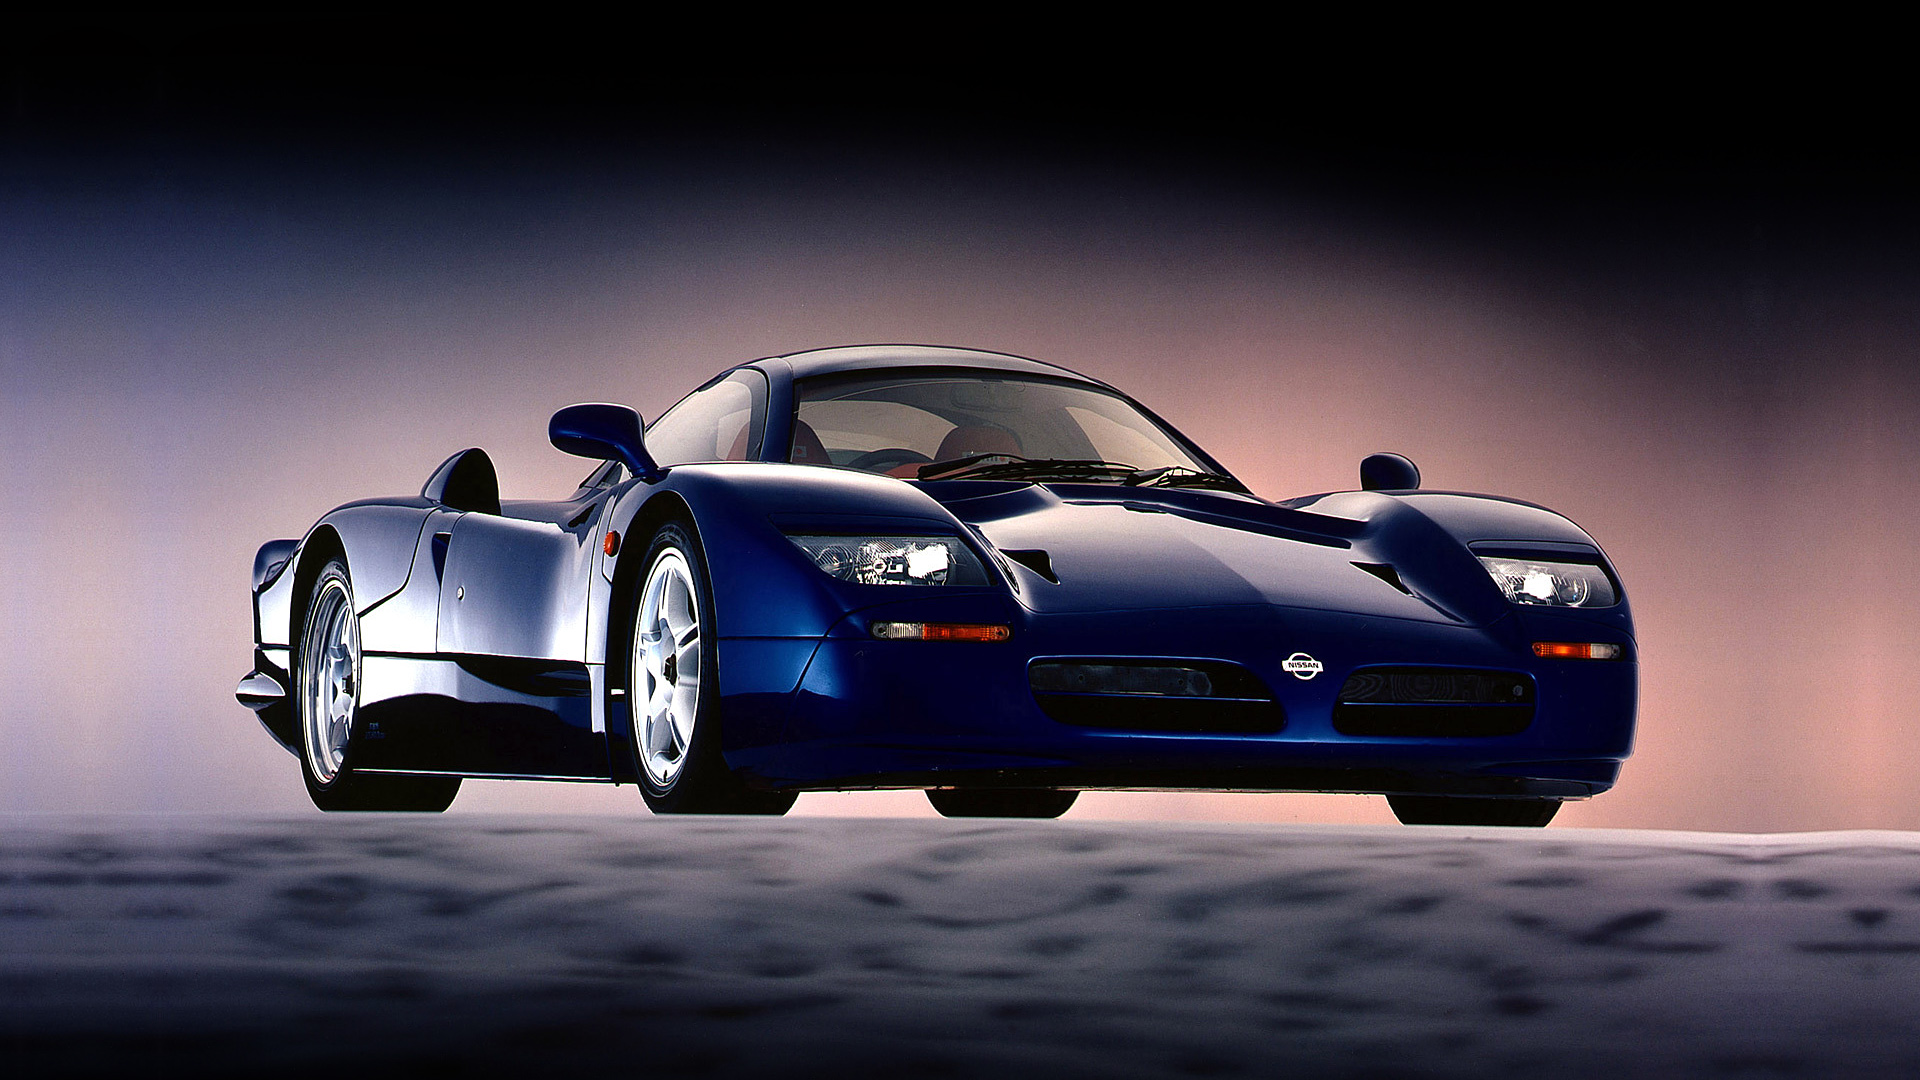 Nissan R390 Gt1 Wallpaper HD Image Wsupercars